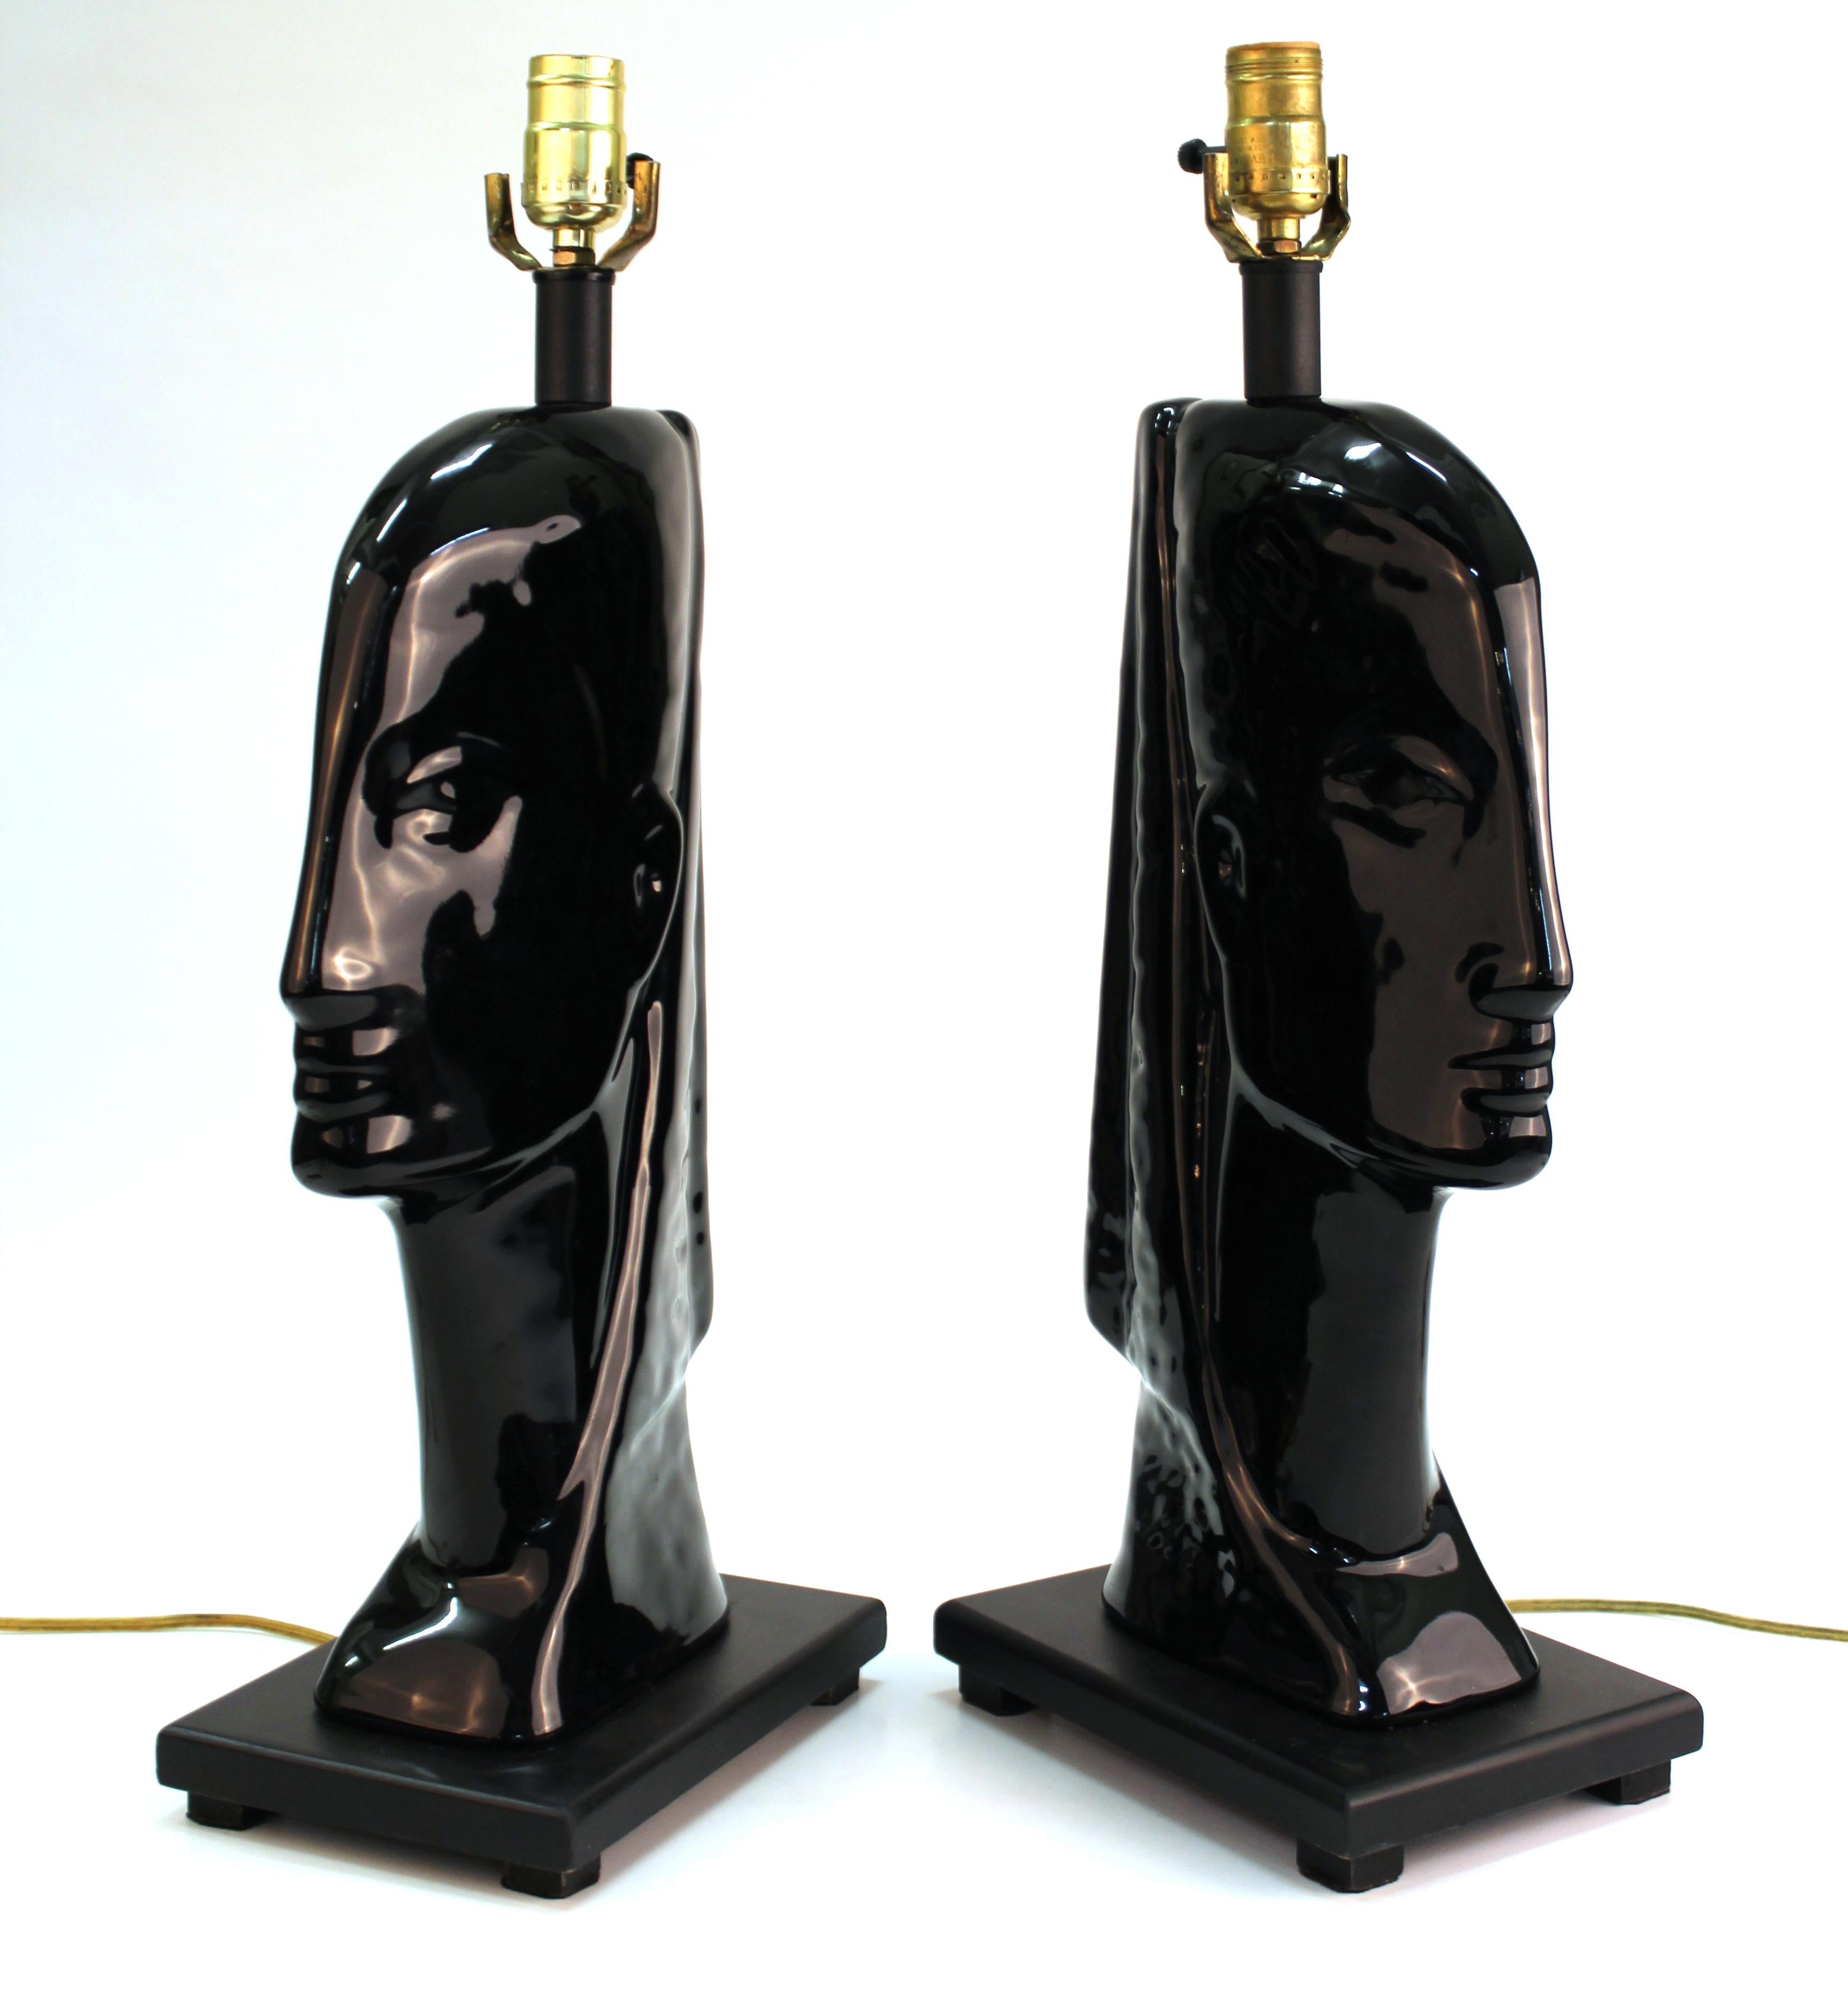 Mid-Century Modern pair of table lamps in the shape of female heads made in black ceramic and mounted on wooden bases. The pair is in great vintage condition with age-appropriate wear.